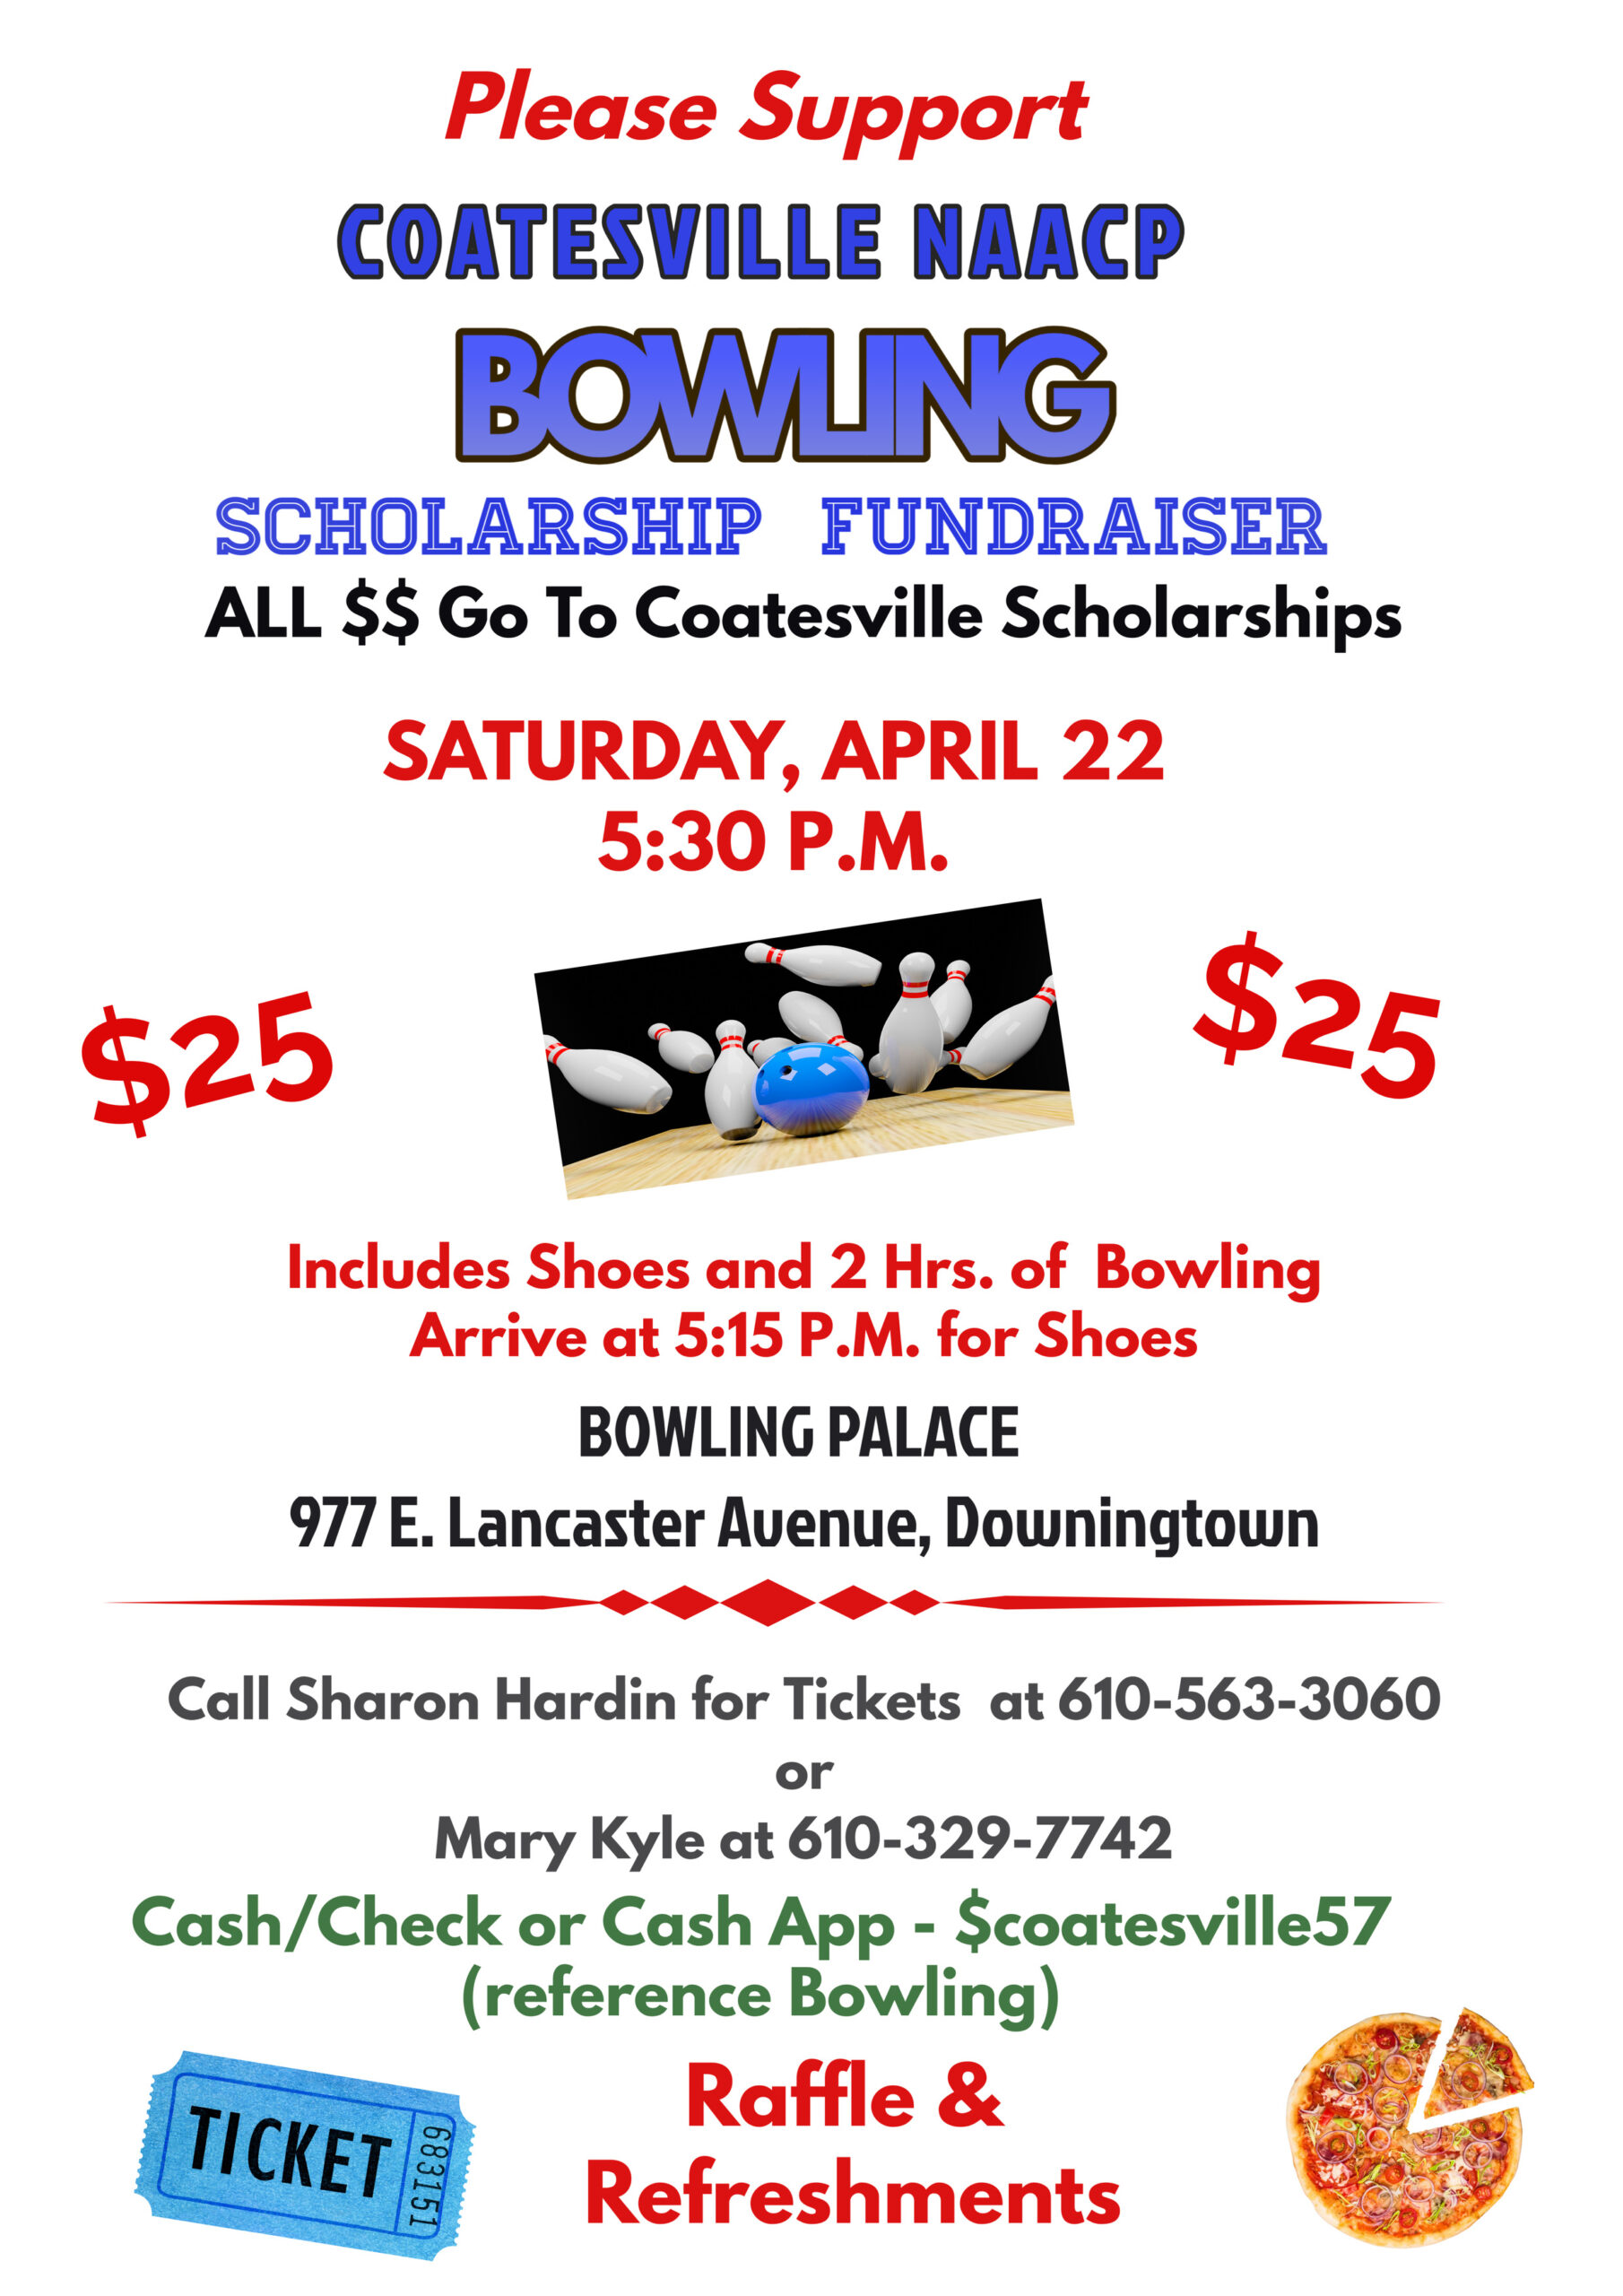 Mark your calendars for the Coatesville Area Branch of the NAACP Bowling Scholarship Fundraiser on Saturday April 22, 5:30PM Sharp! Meet us at Bowling Palace in Downingtown.